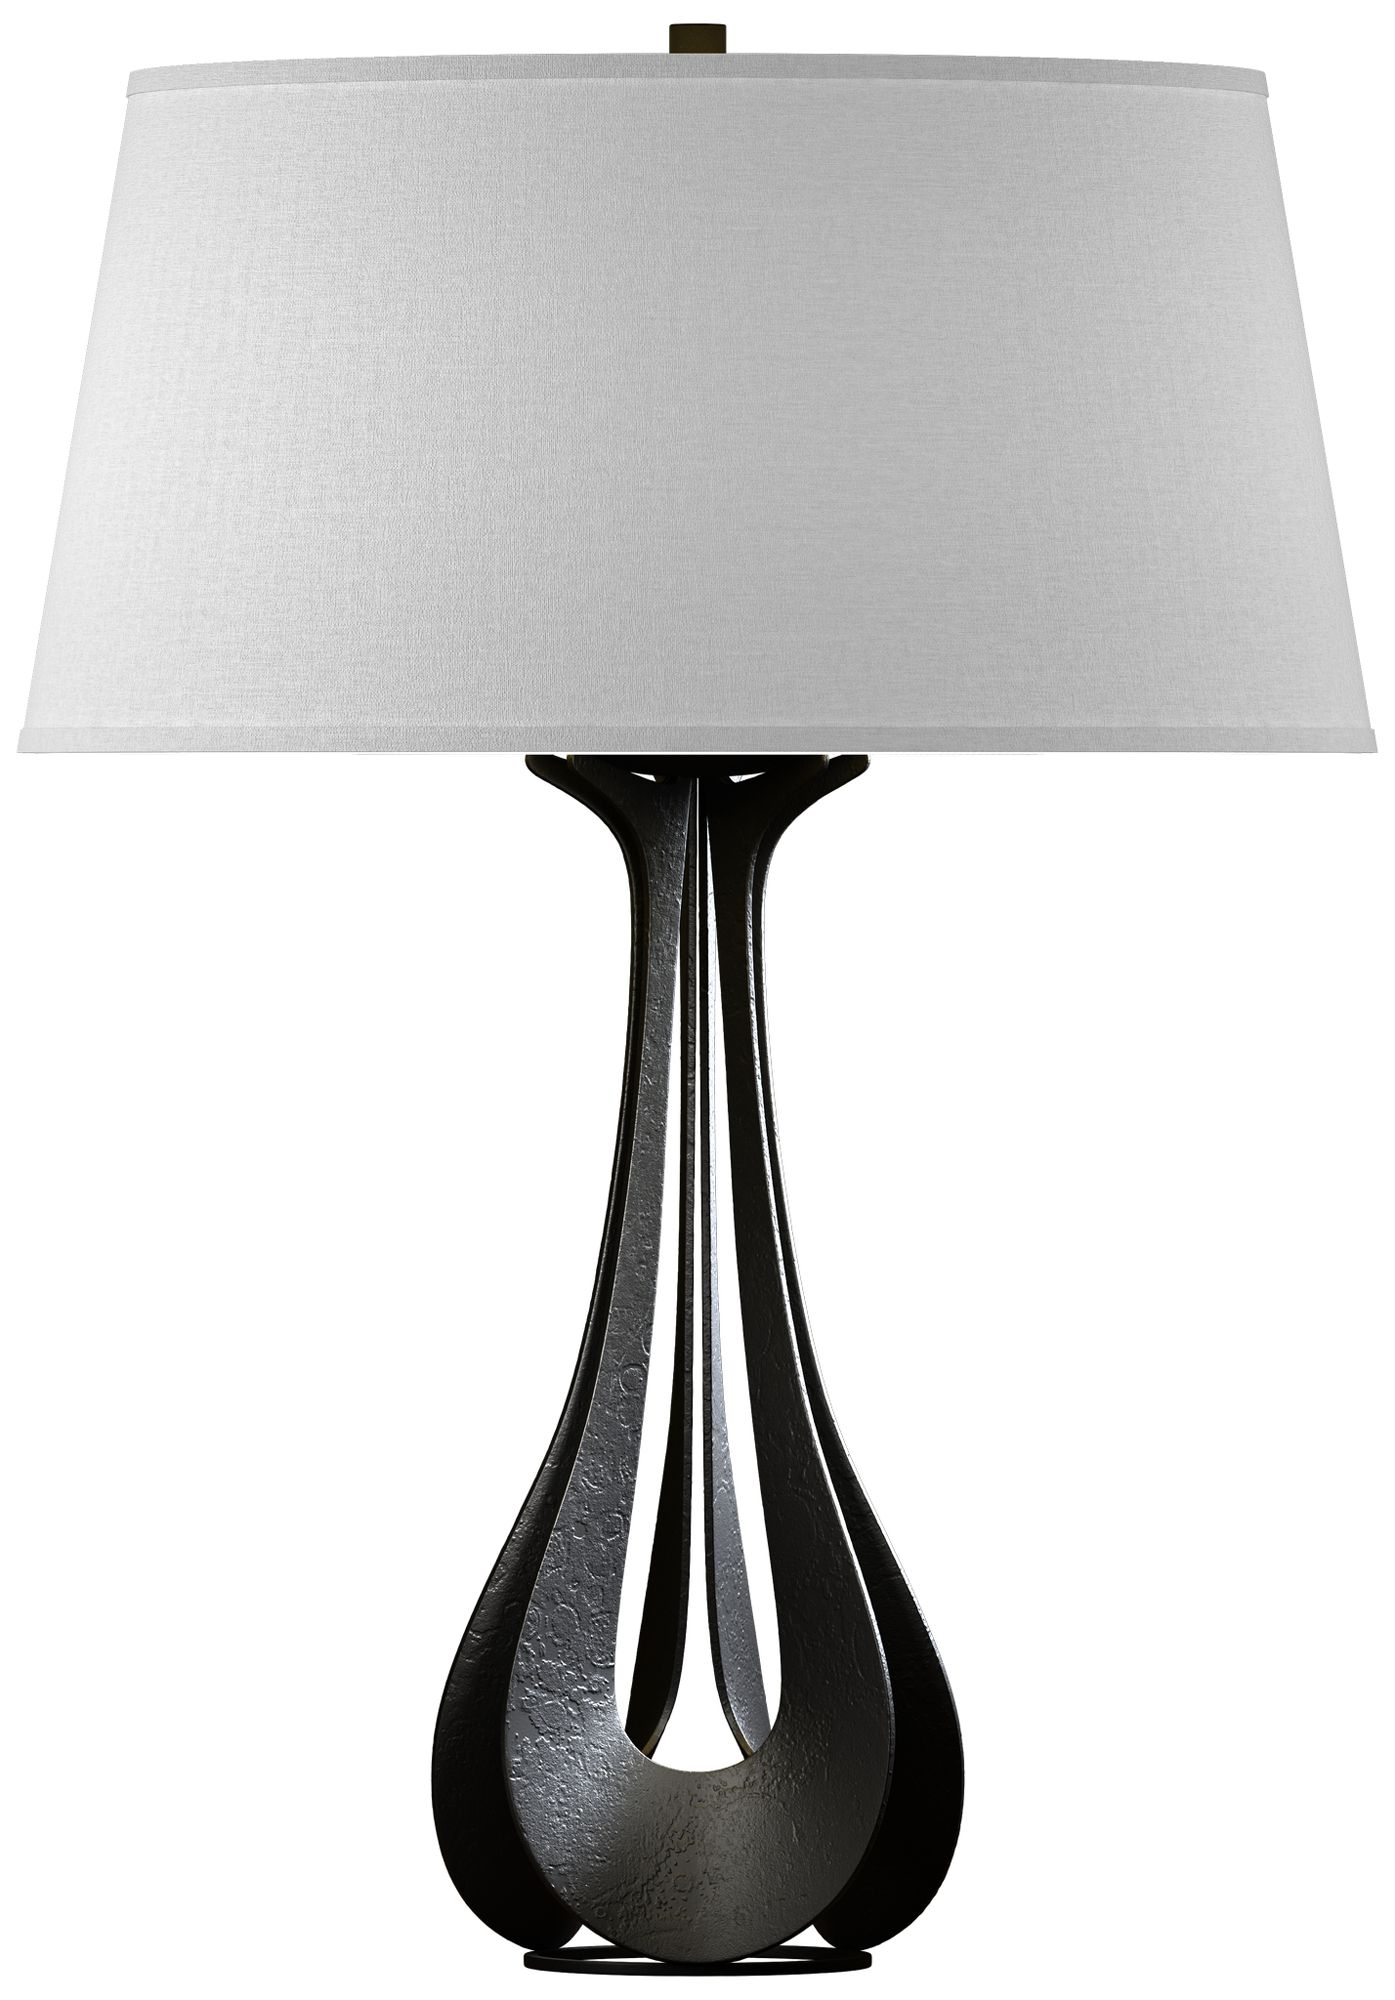 Lino 25.3" High Black Table Lamp With Light Grey Shade